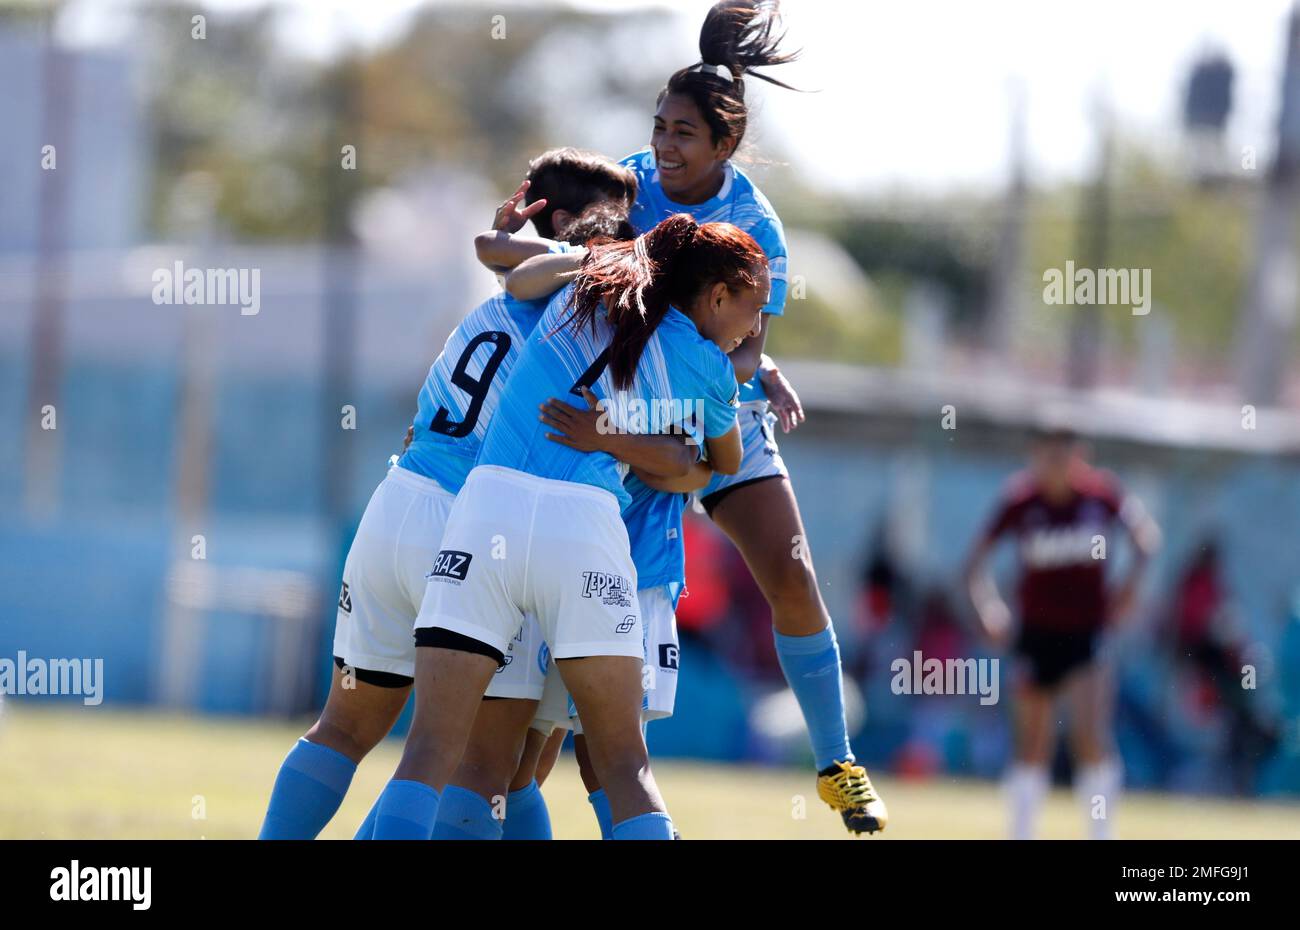 Soccer player Mara Gomez (7), foreground, of Villa San Carlos, celebrates  after teammate Emilia Braga (9) scored her side's opening goal during an  Argentina's professional women's soccer league match against Lanus in